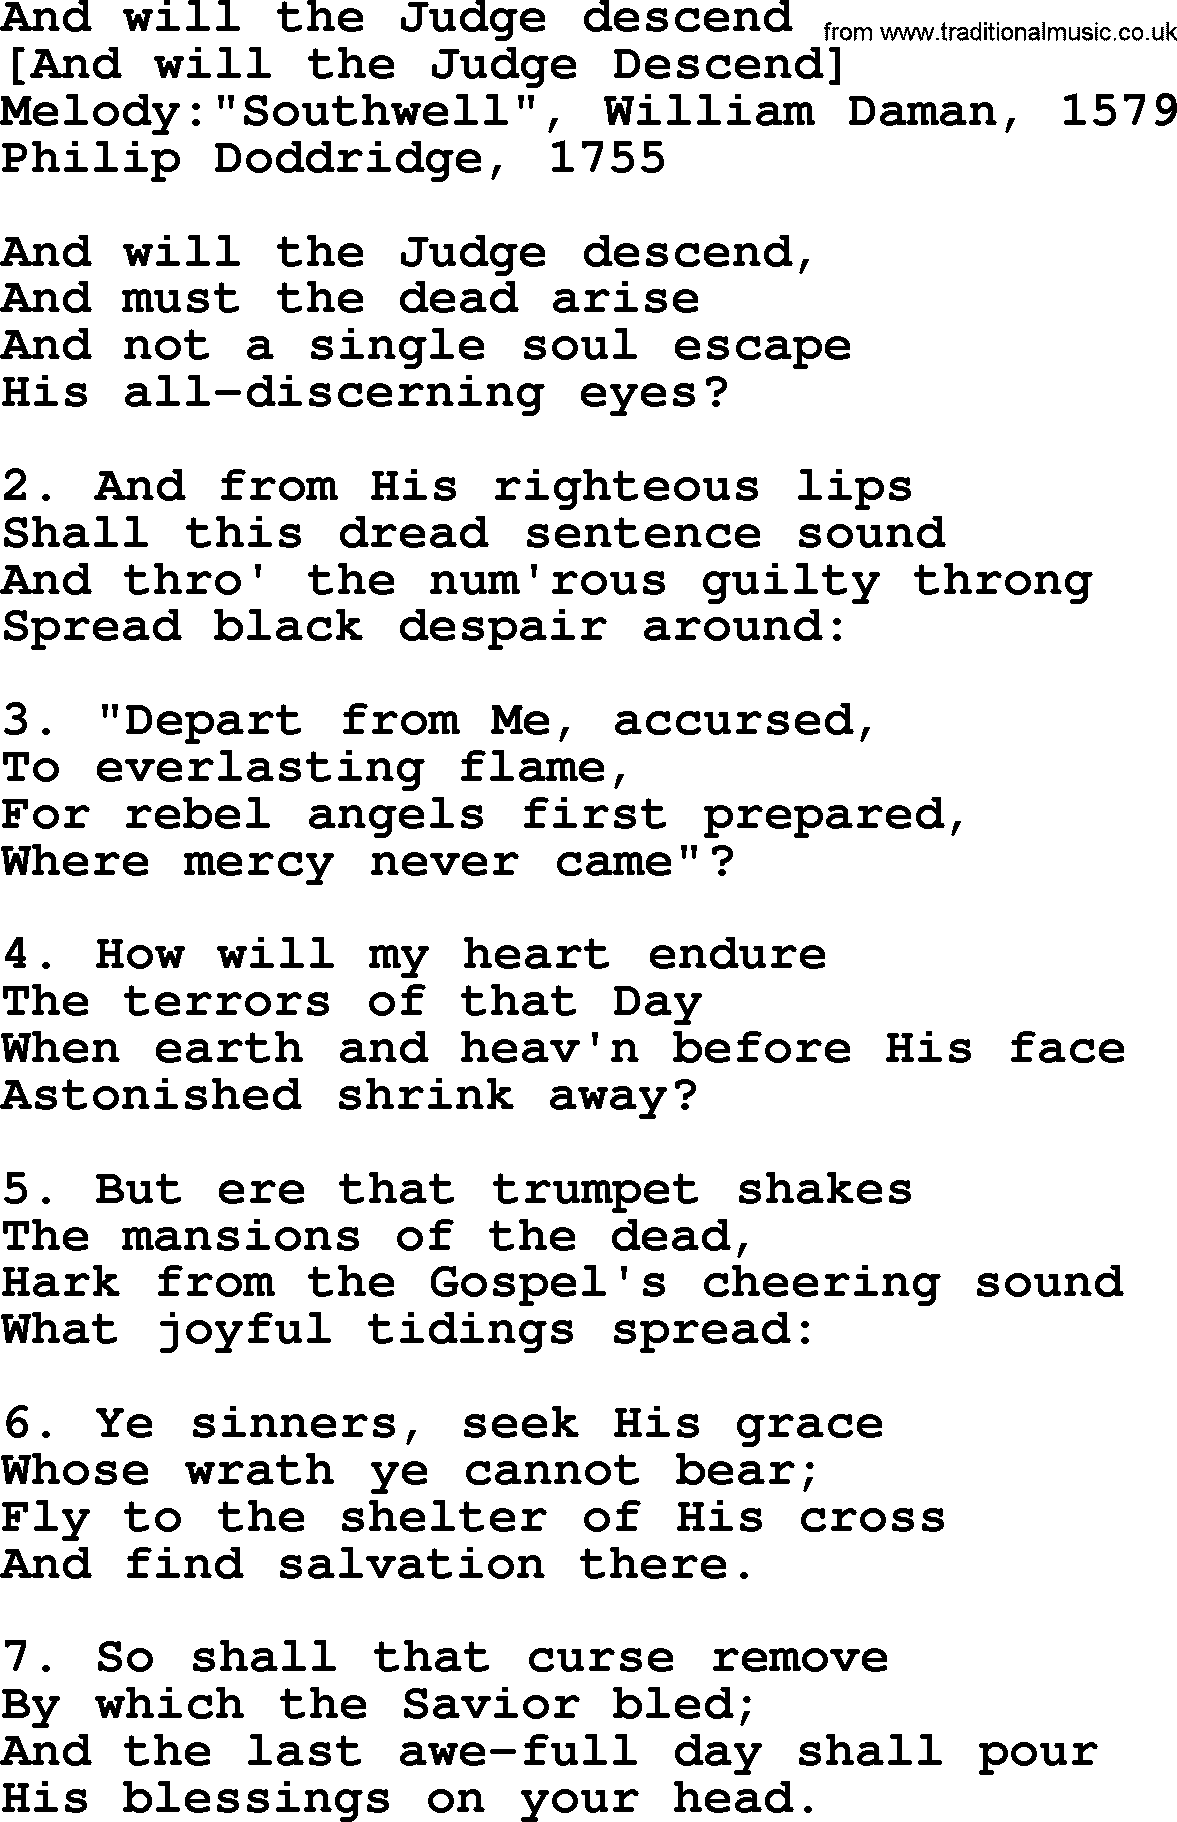 Old English Song: And Will The Judge Descend lyrics